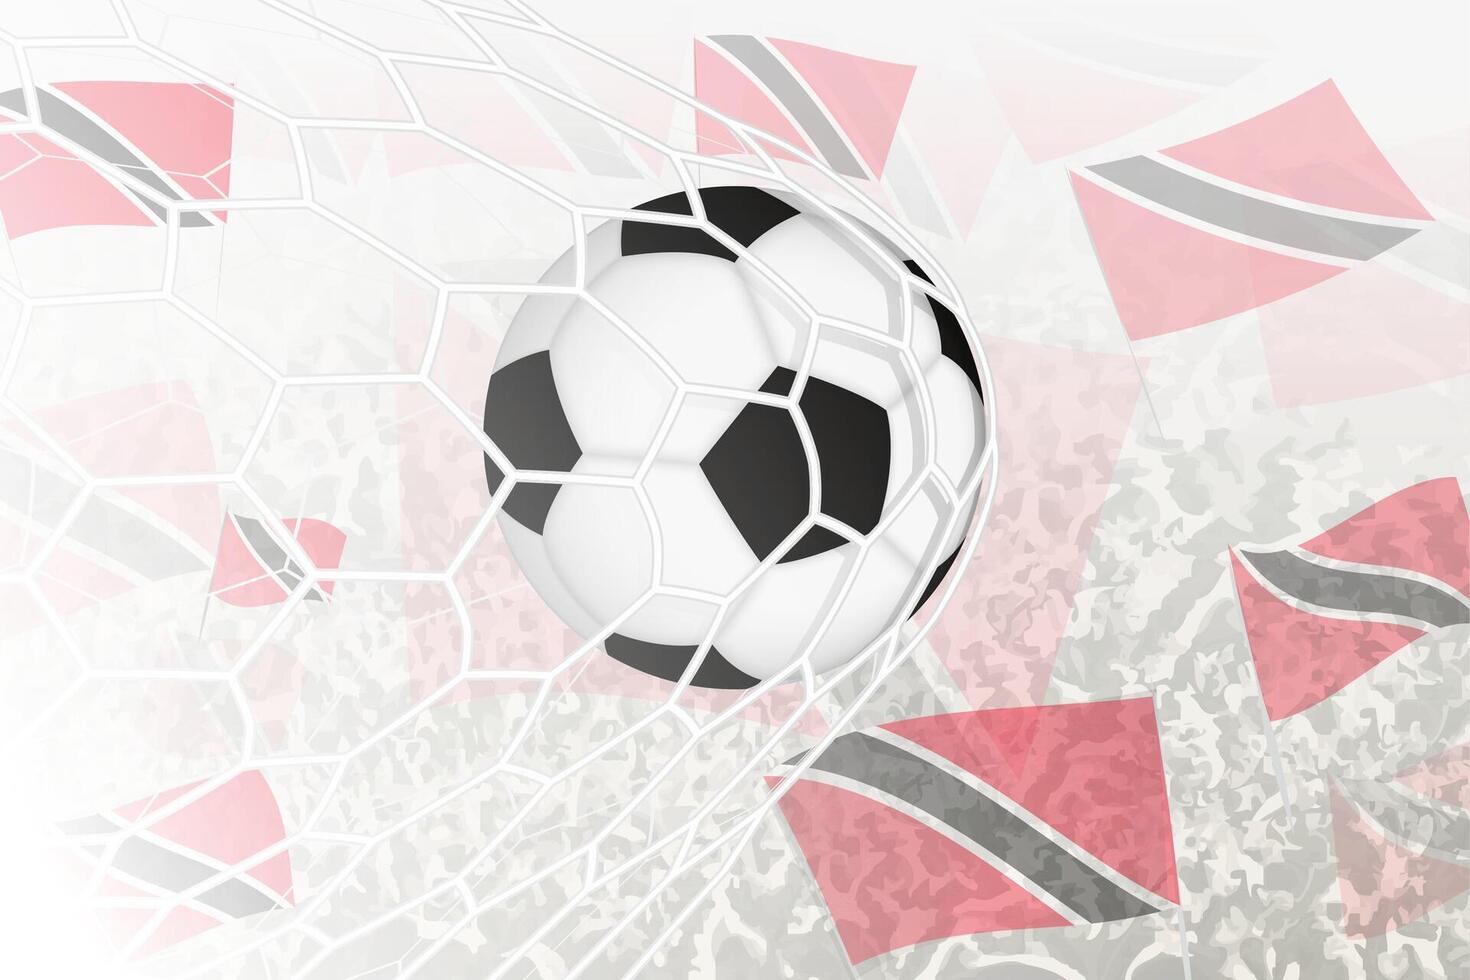 National Football team of Trinidad and Tobago scored goal. Ball in goal net, while football supporters are waving the Trinidad and Tobago flag in the background. vector